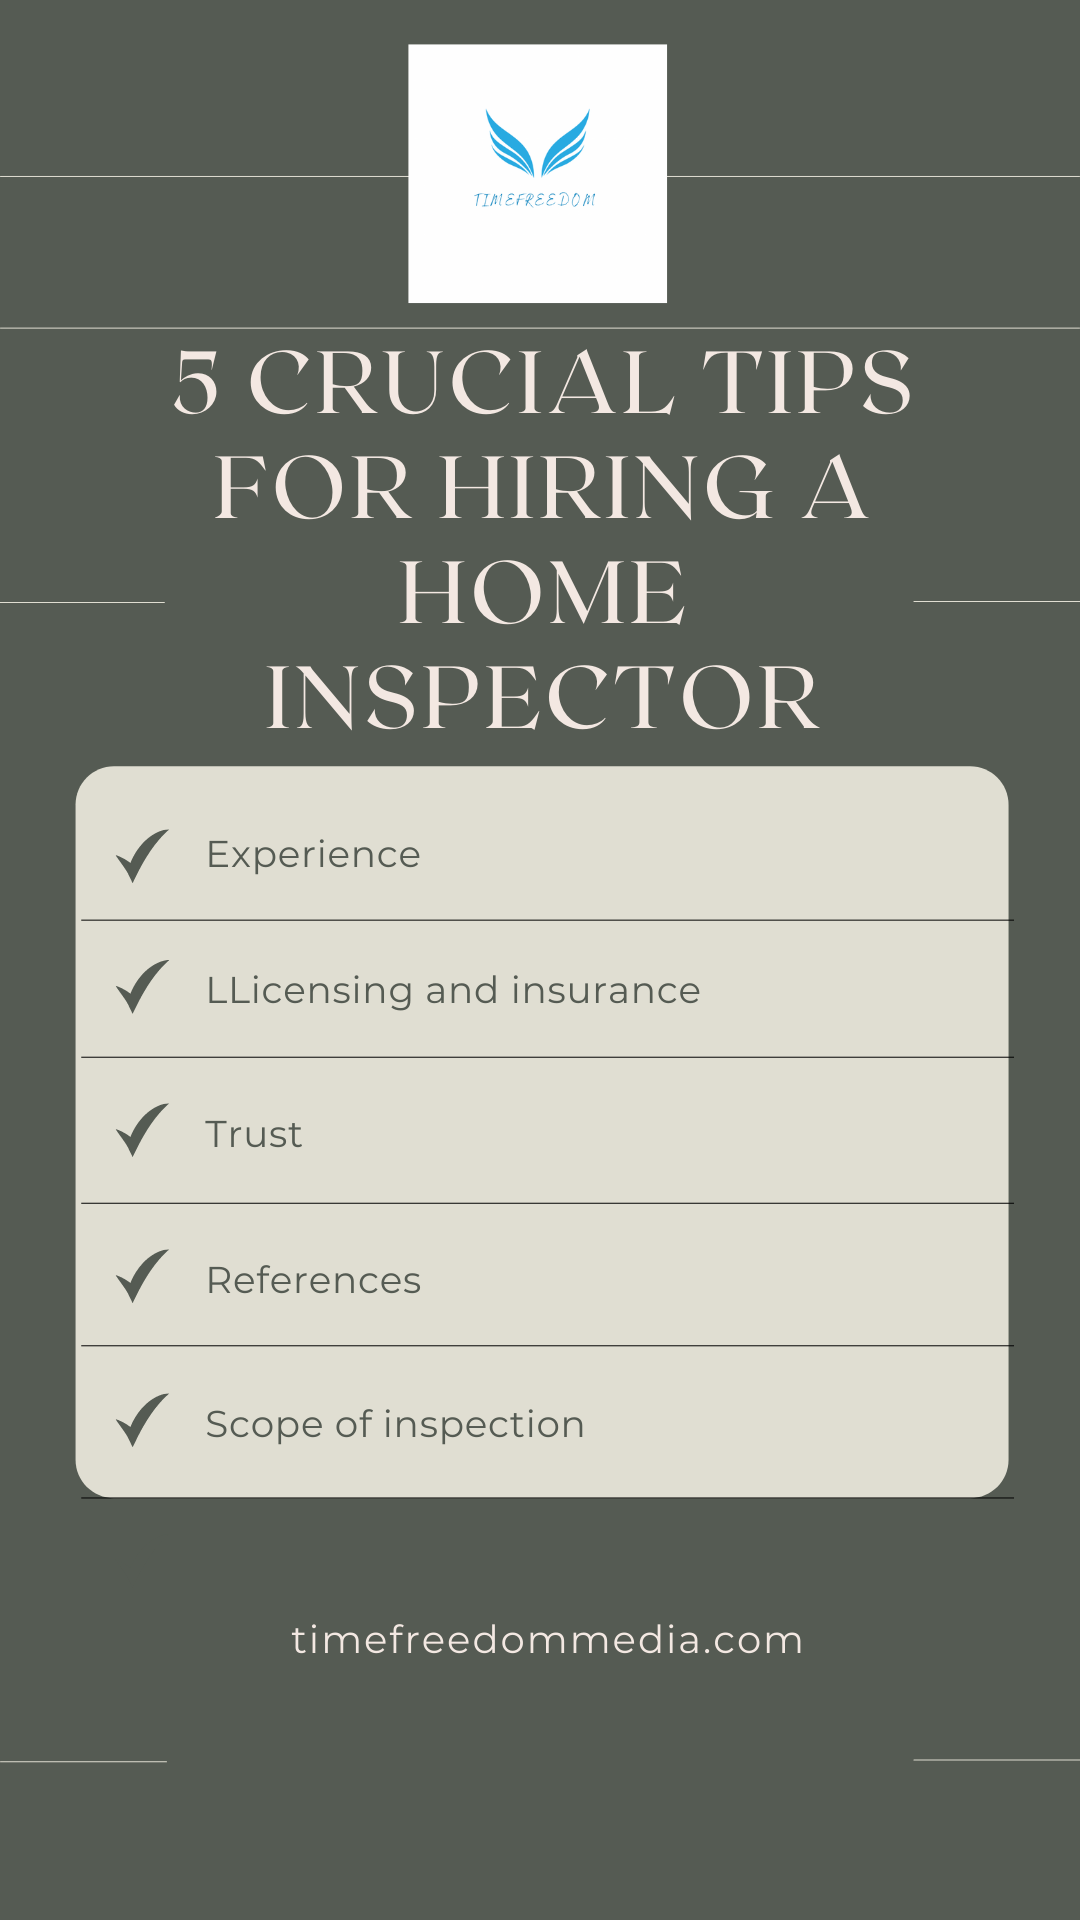 5 Crucial Tips for Hiring a Home Inspector